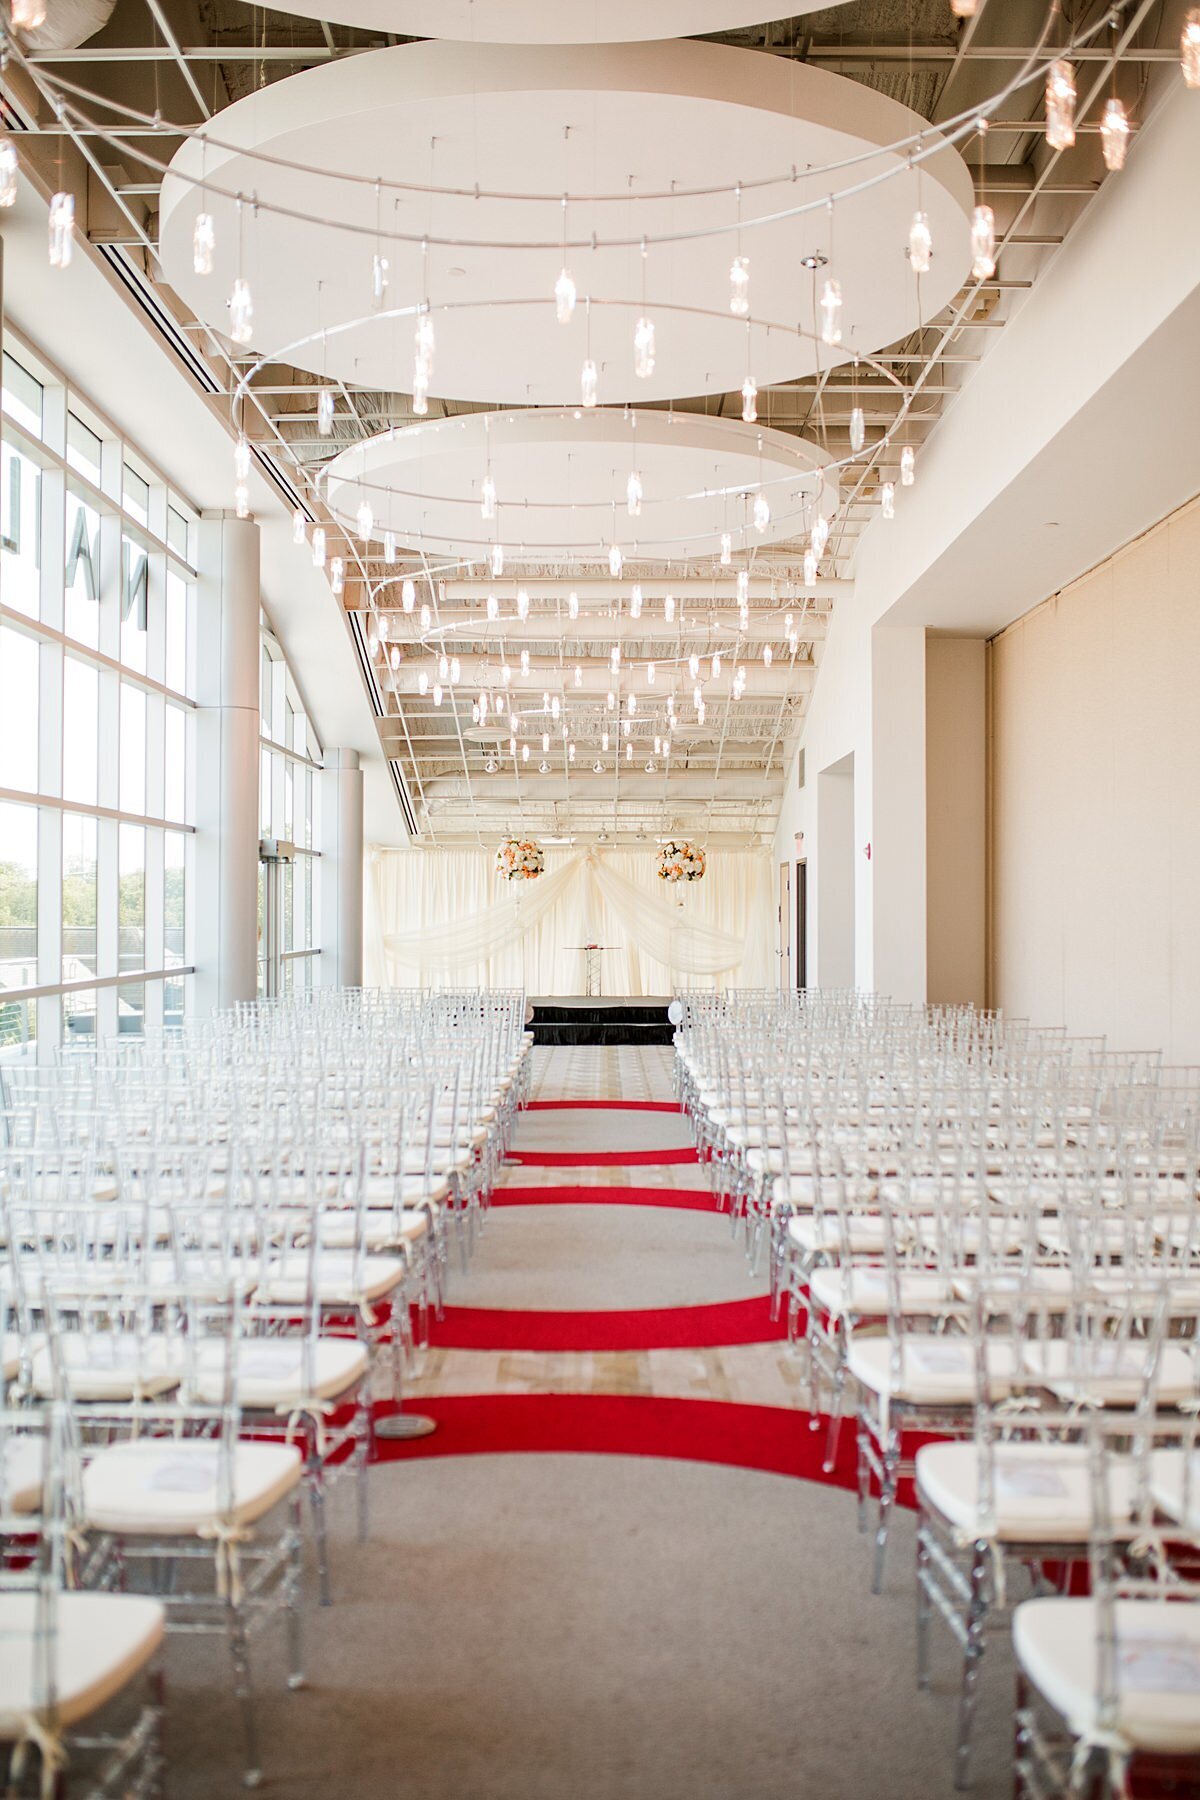 Wedding ceremony at Liff Center with clear chivari chairs with white cushions. The red and white carpet lead up to a white and orange ceremony space with crystal chandeliers at the Nashville Opera - Noah Liff Opera Center